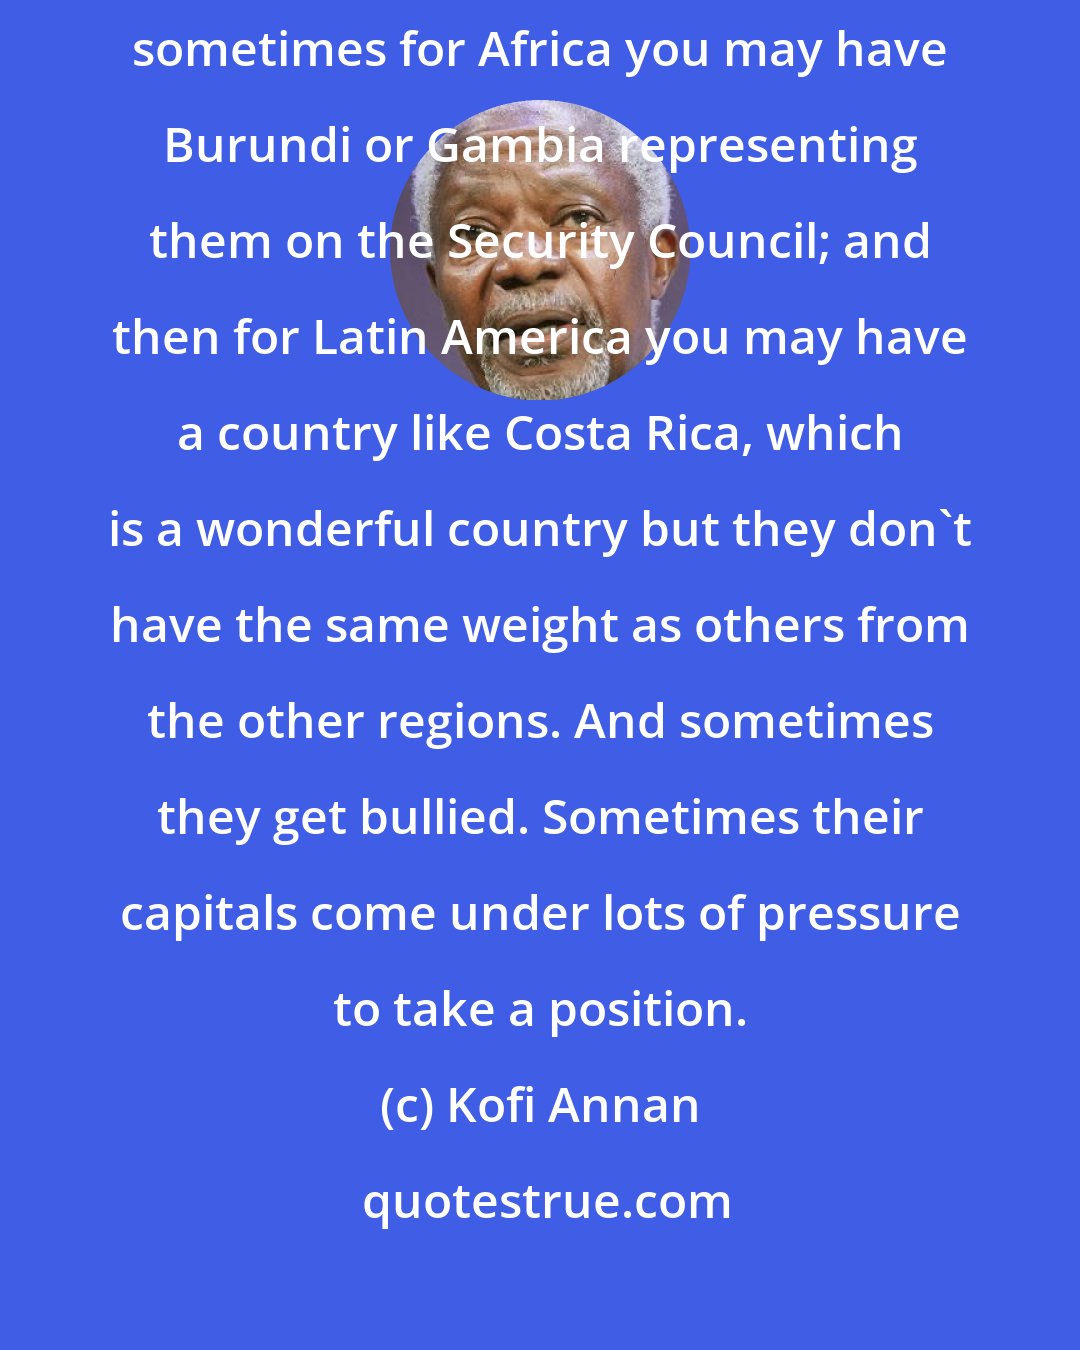 Kofi Annan: When you have difficult issues on the table for discussion, then sometimes for Africa you may have Burundi or Gambia representing them on the Security Council; and then for Latin America you may have a country like Costa Rica, which is a wonderful country but they don't have the same weight as others from the other regions. And sometimes they get bullied. Sometimes their capitals come under lots of pressure to take a position.